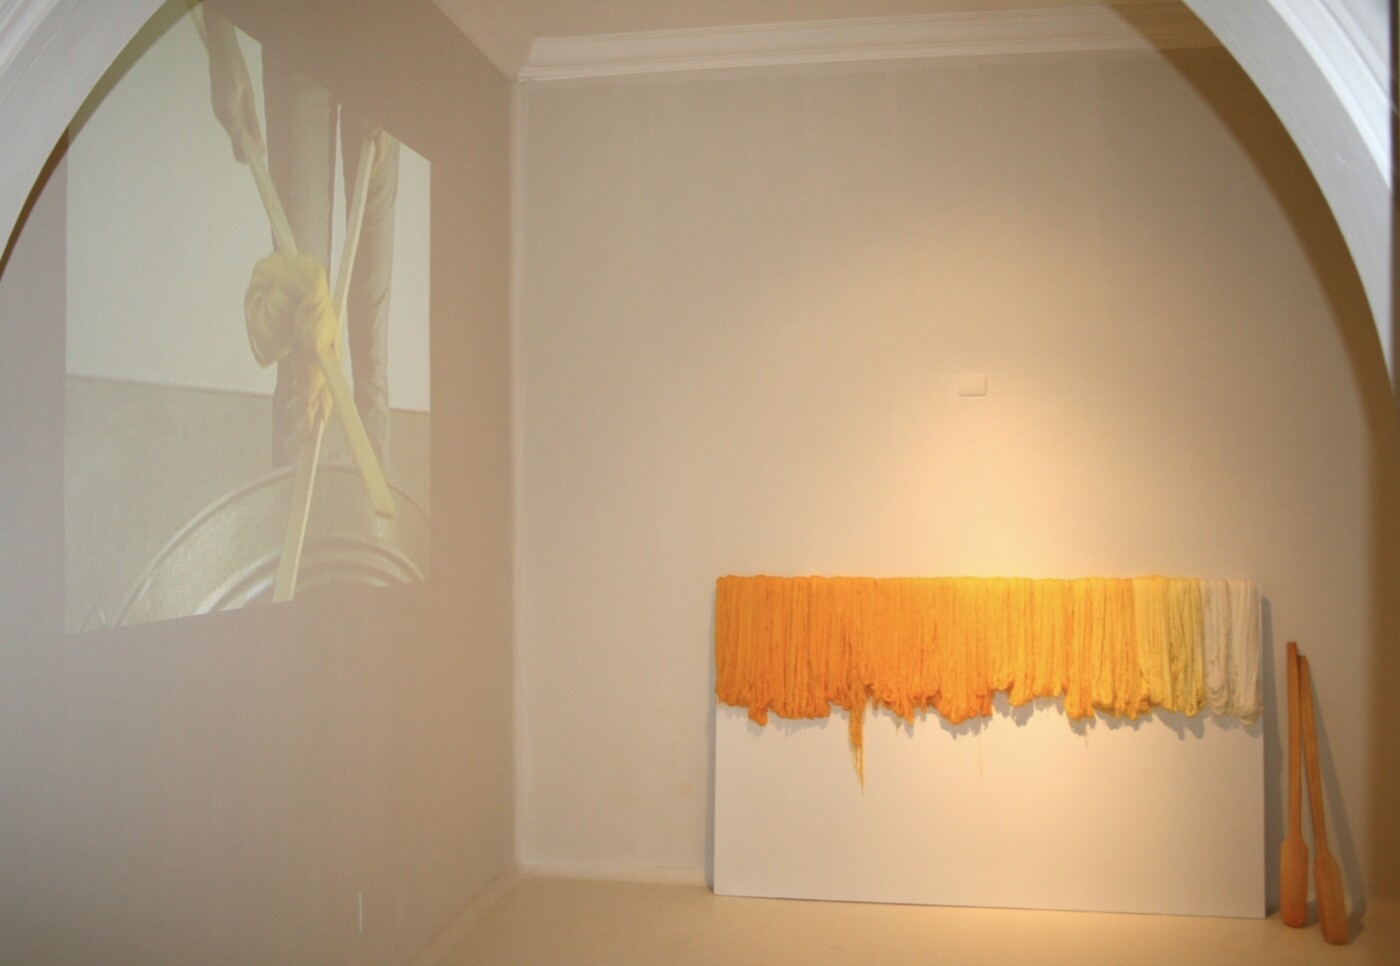 Installation artwork containing a leaning panel at center, draped with a fabric fringe in shades of yellow, a set of paddle-shaped wooden objects on the righthand side of the panel, and a video projection on a lefthand wall.